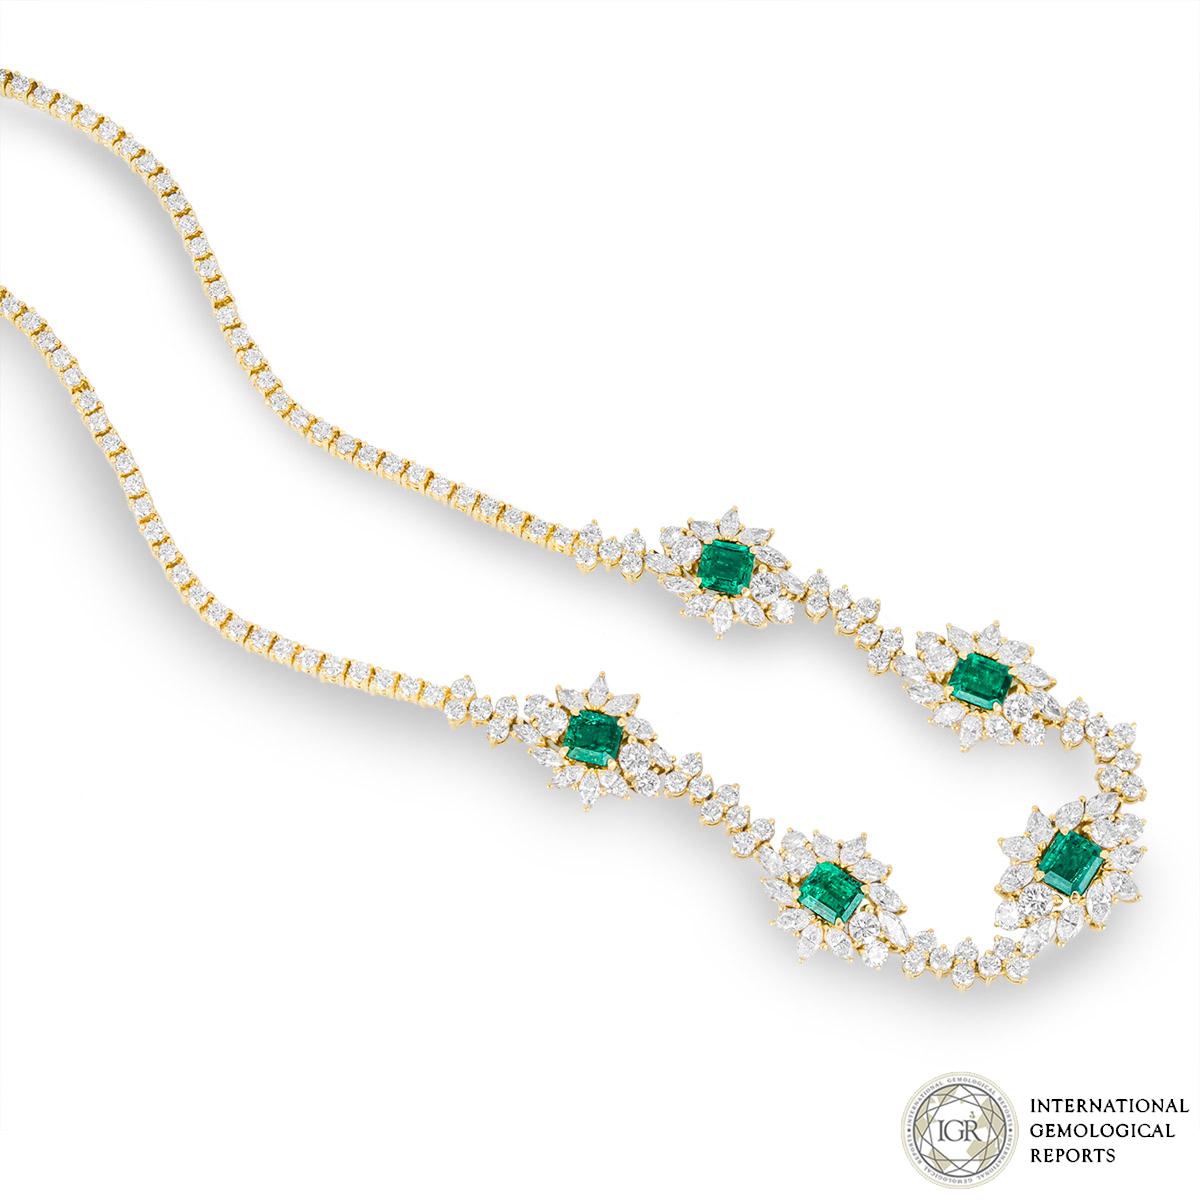 Mixed Cut IGR Certified Yellow Gold Diamond and Columbian Emerald Necklace